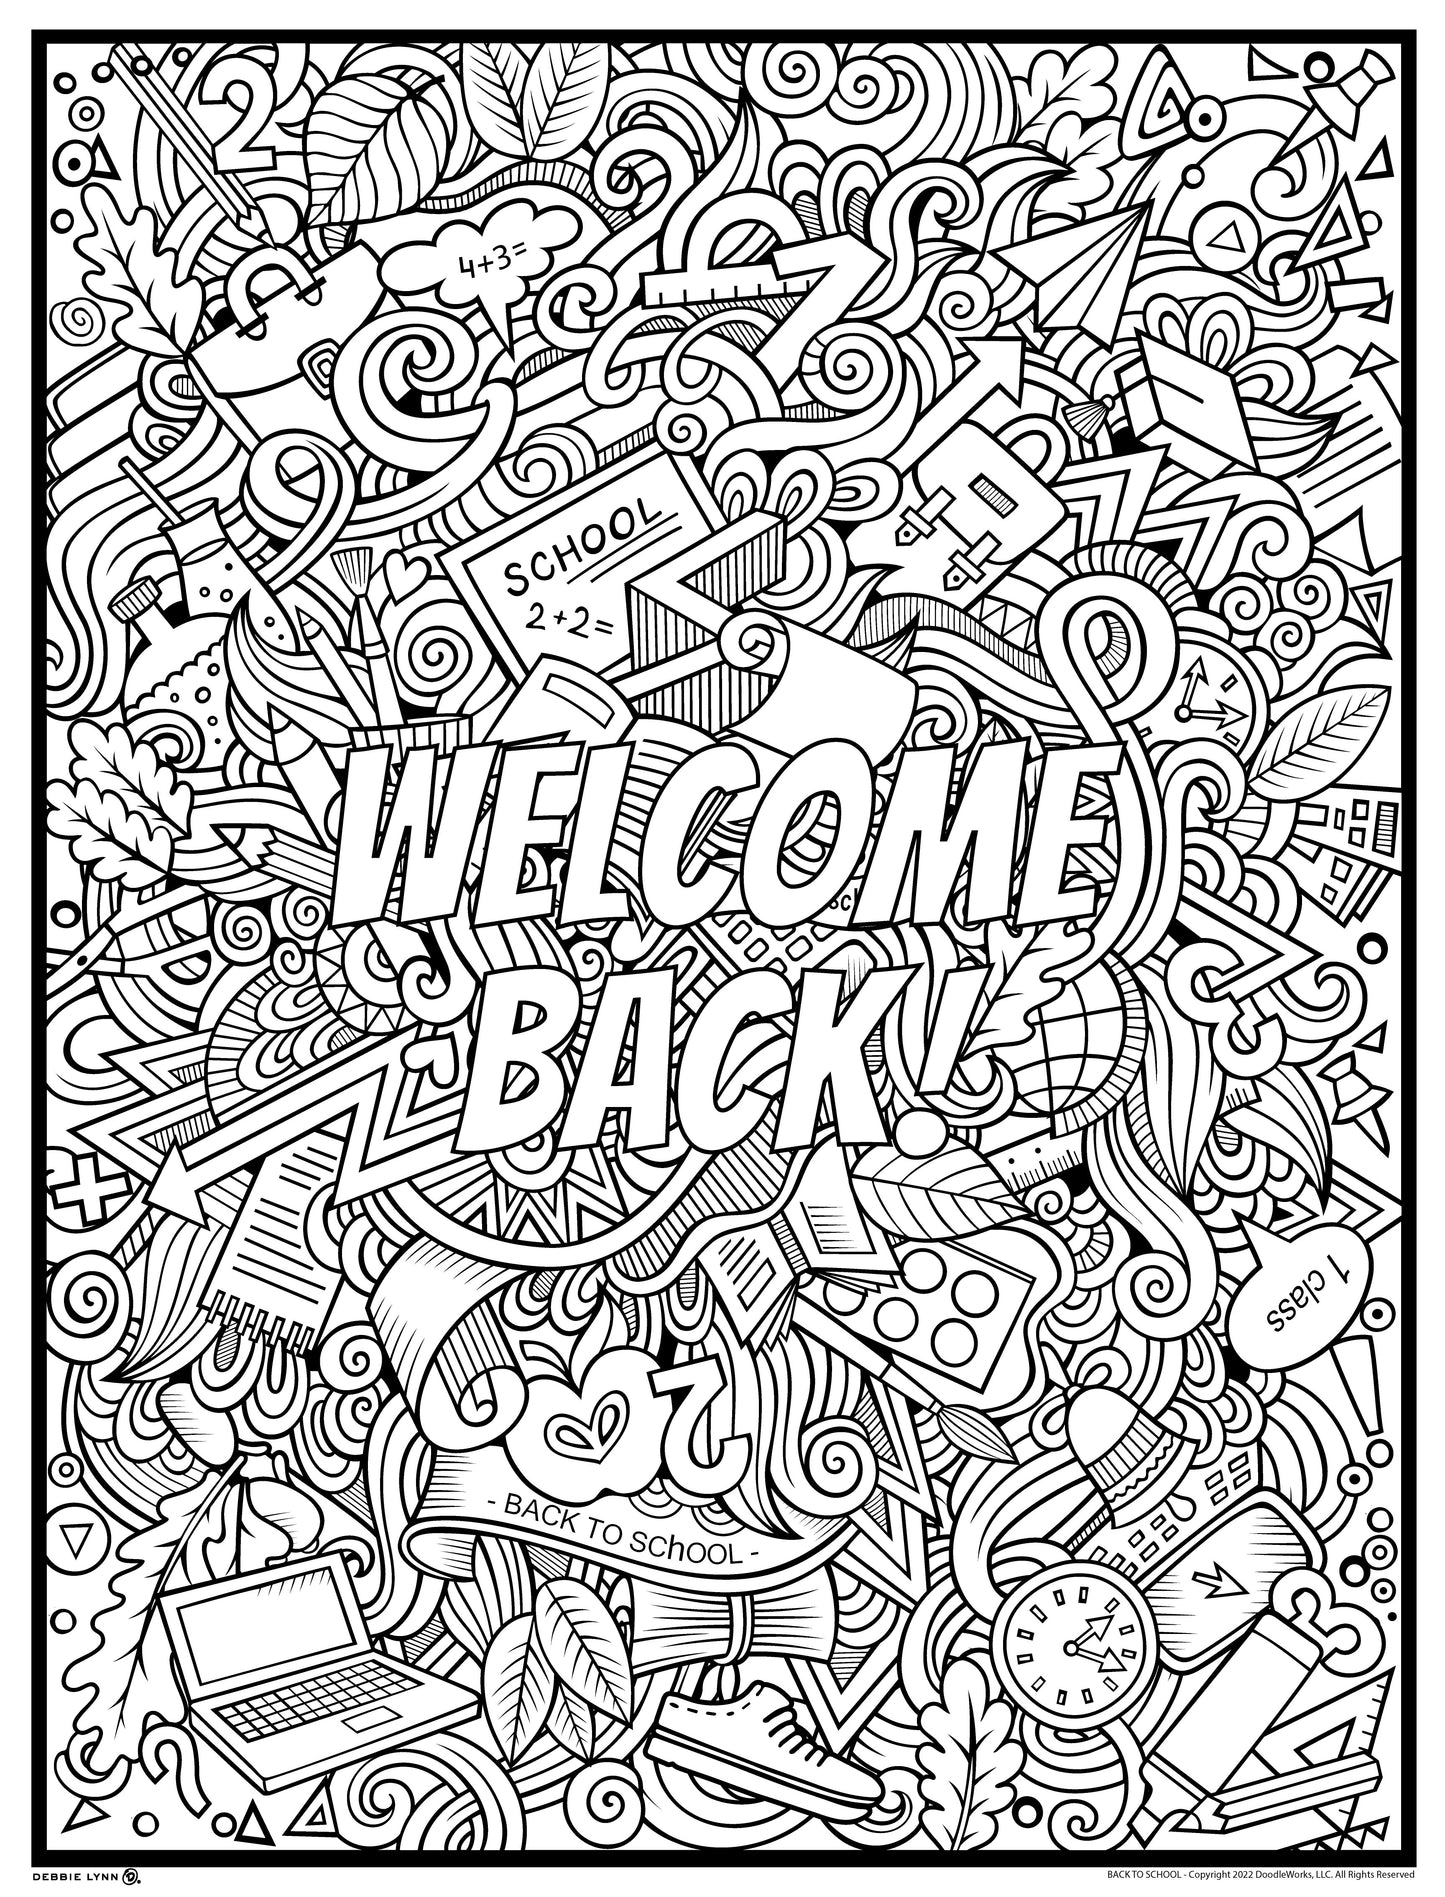 Welcome Back to School Personalized Giant Coloring Poster  46"x60"